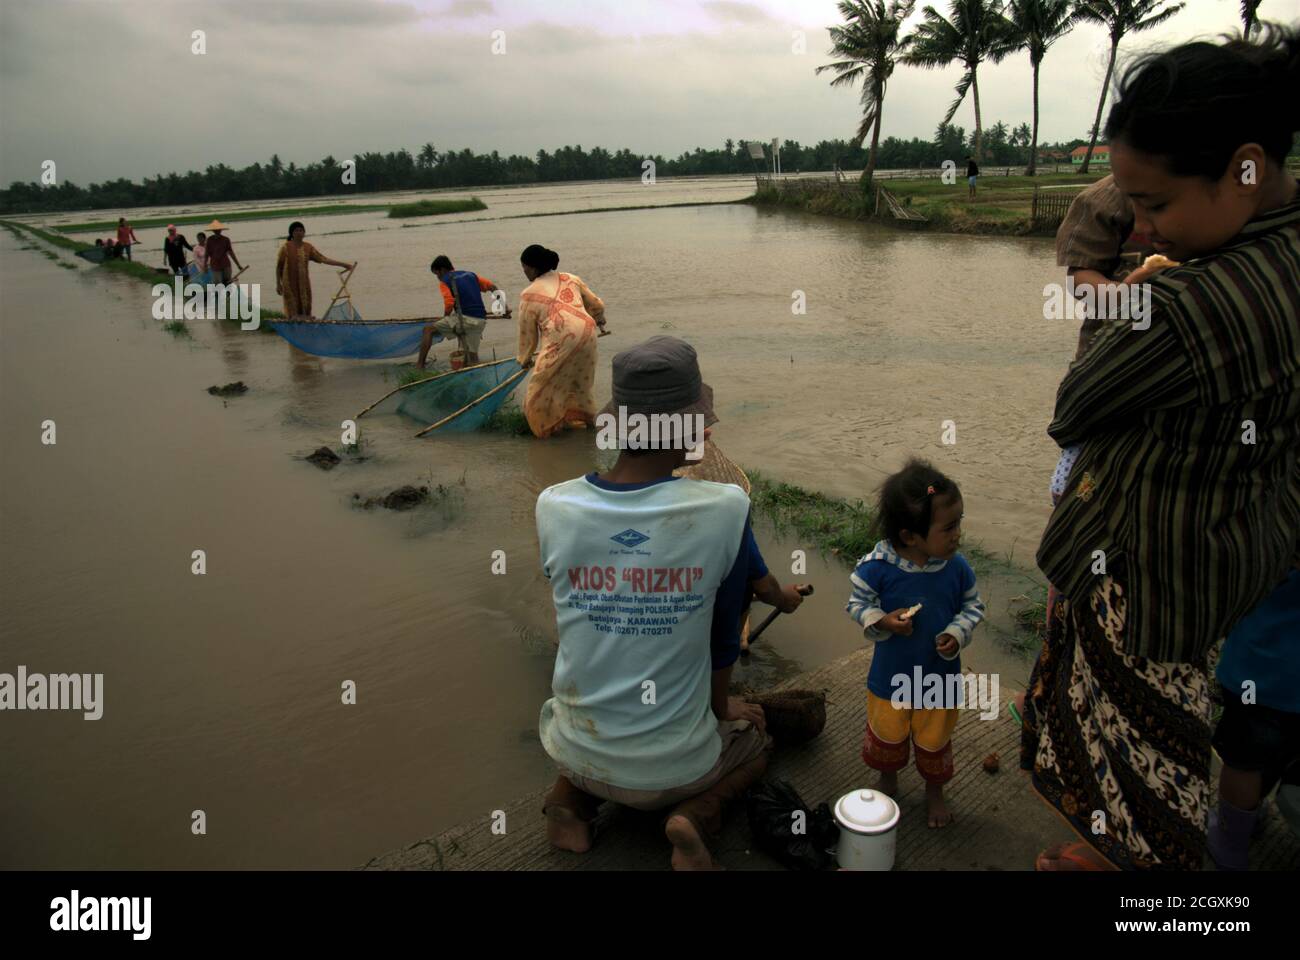 Farmers fishing together from embankment as torrential rains during rainy season have left some agricultural areas flooded in Karawang, Indonesia. Stock Photo